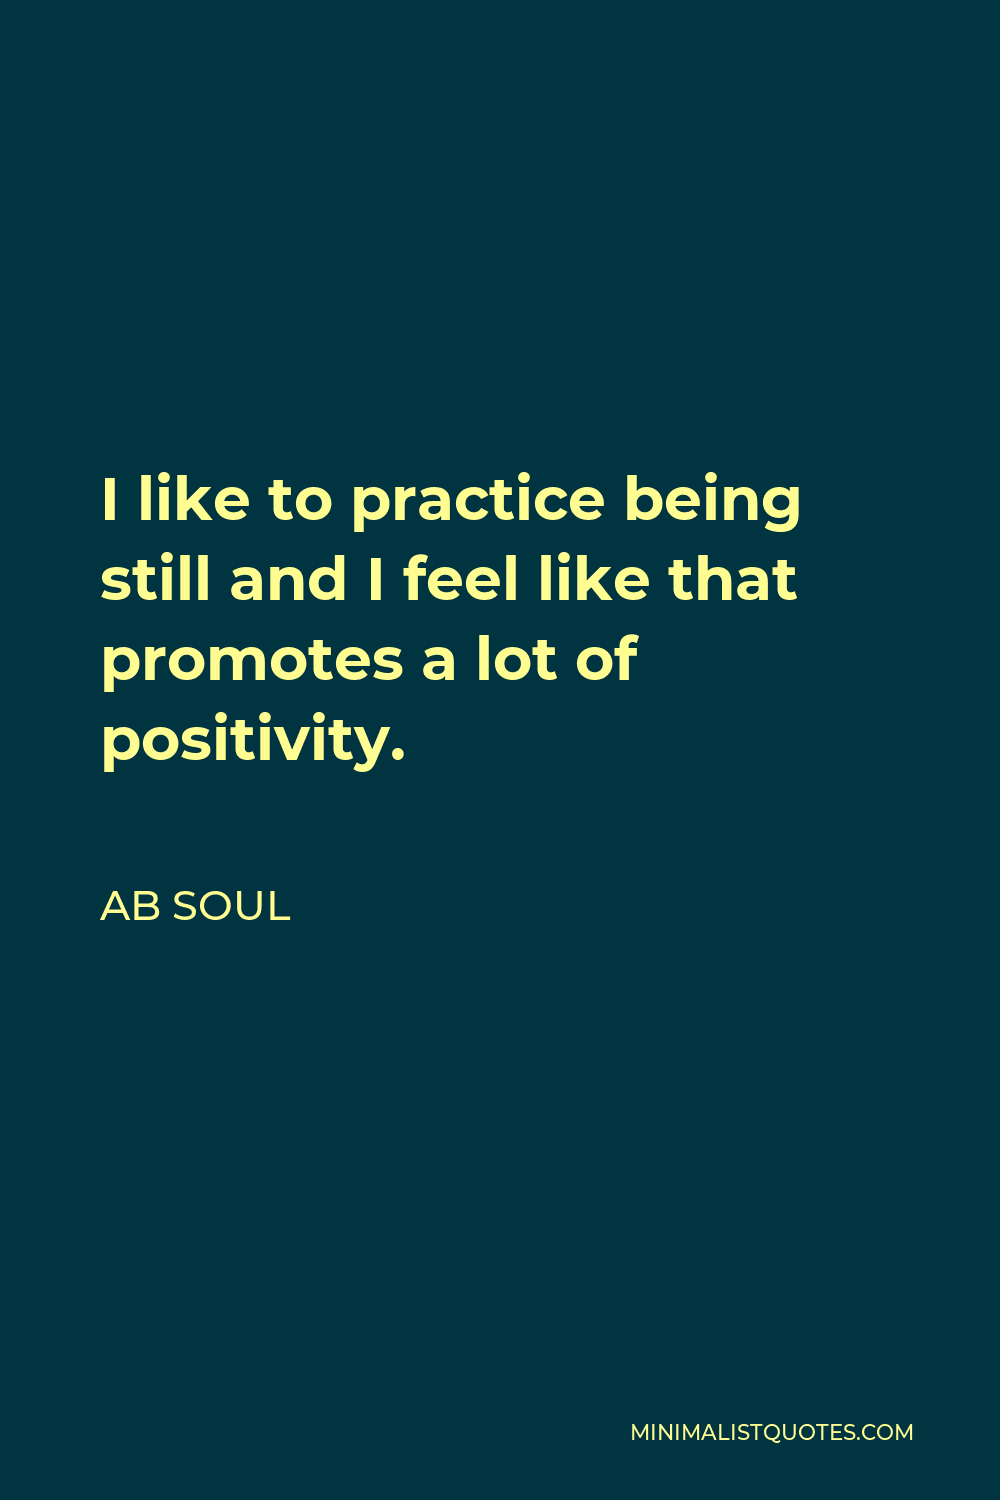 Ab Soul Quote I Like To Practice Being Still And I Feel Like That Promotes A Lot Of Positivity